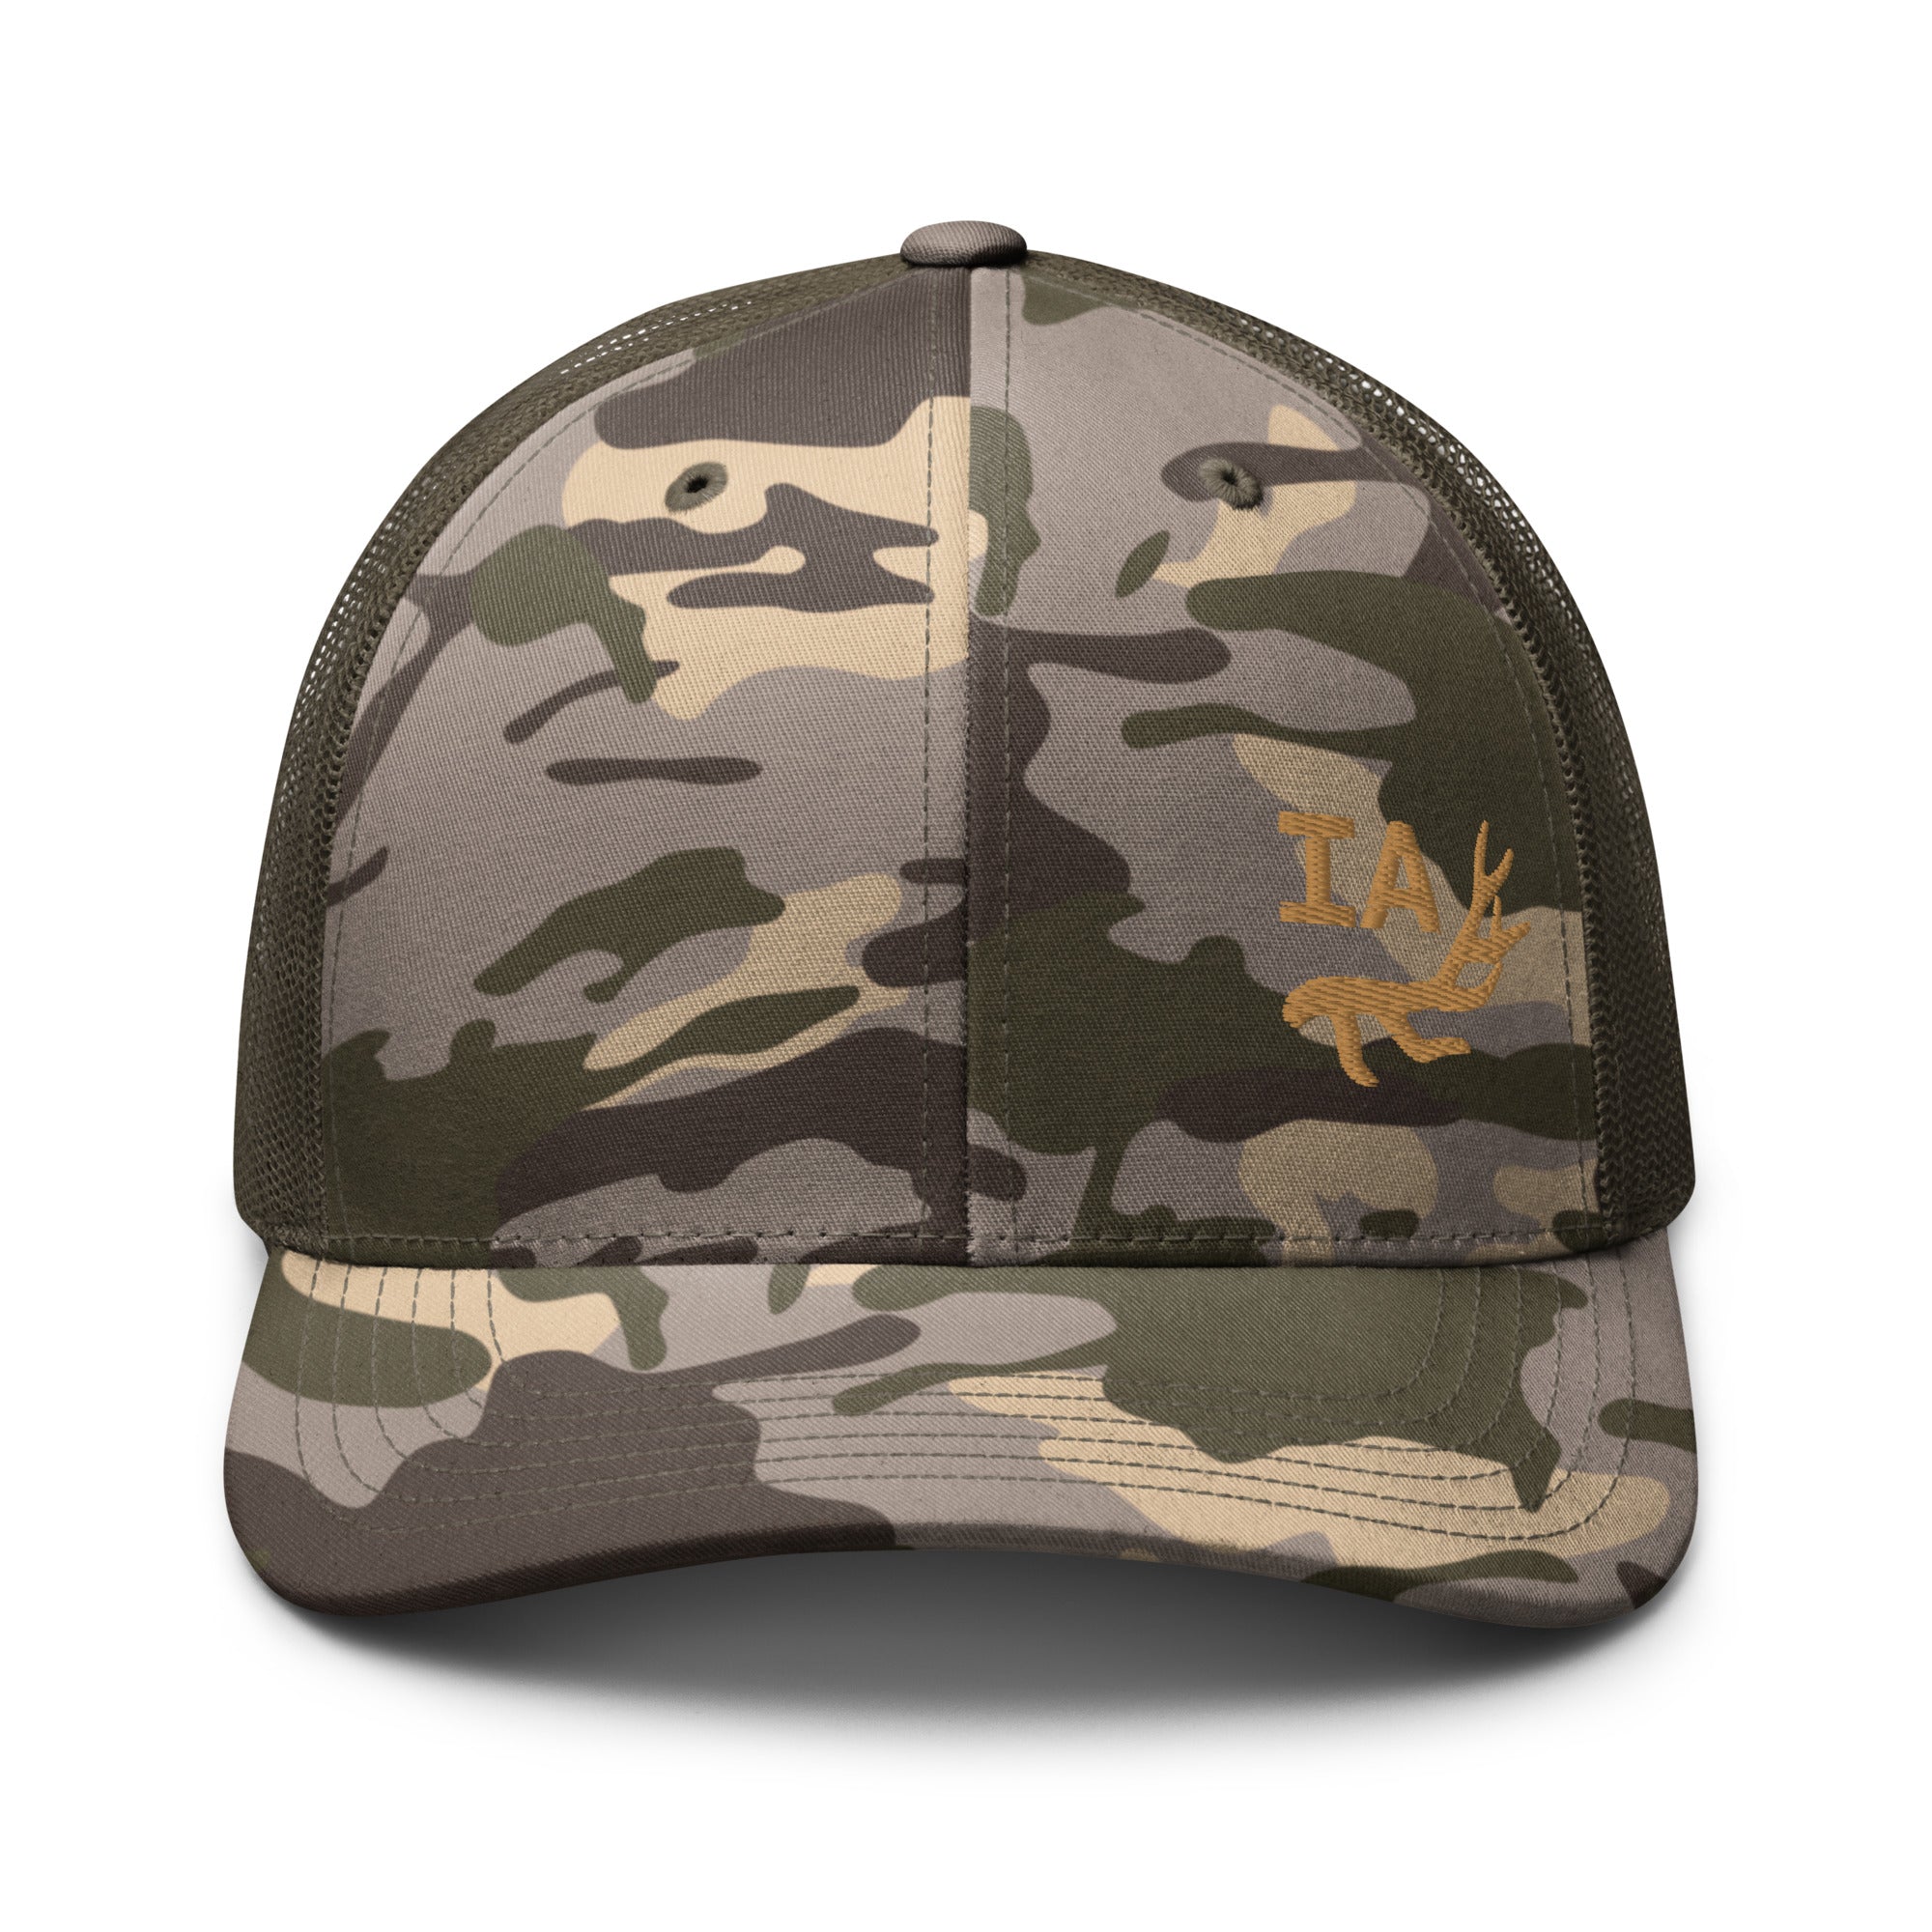 camouflage-trucker-hat-camo-olive-front-655e6099f0675.jpg